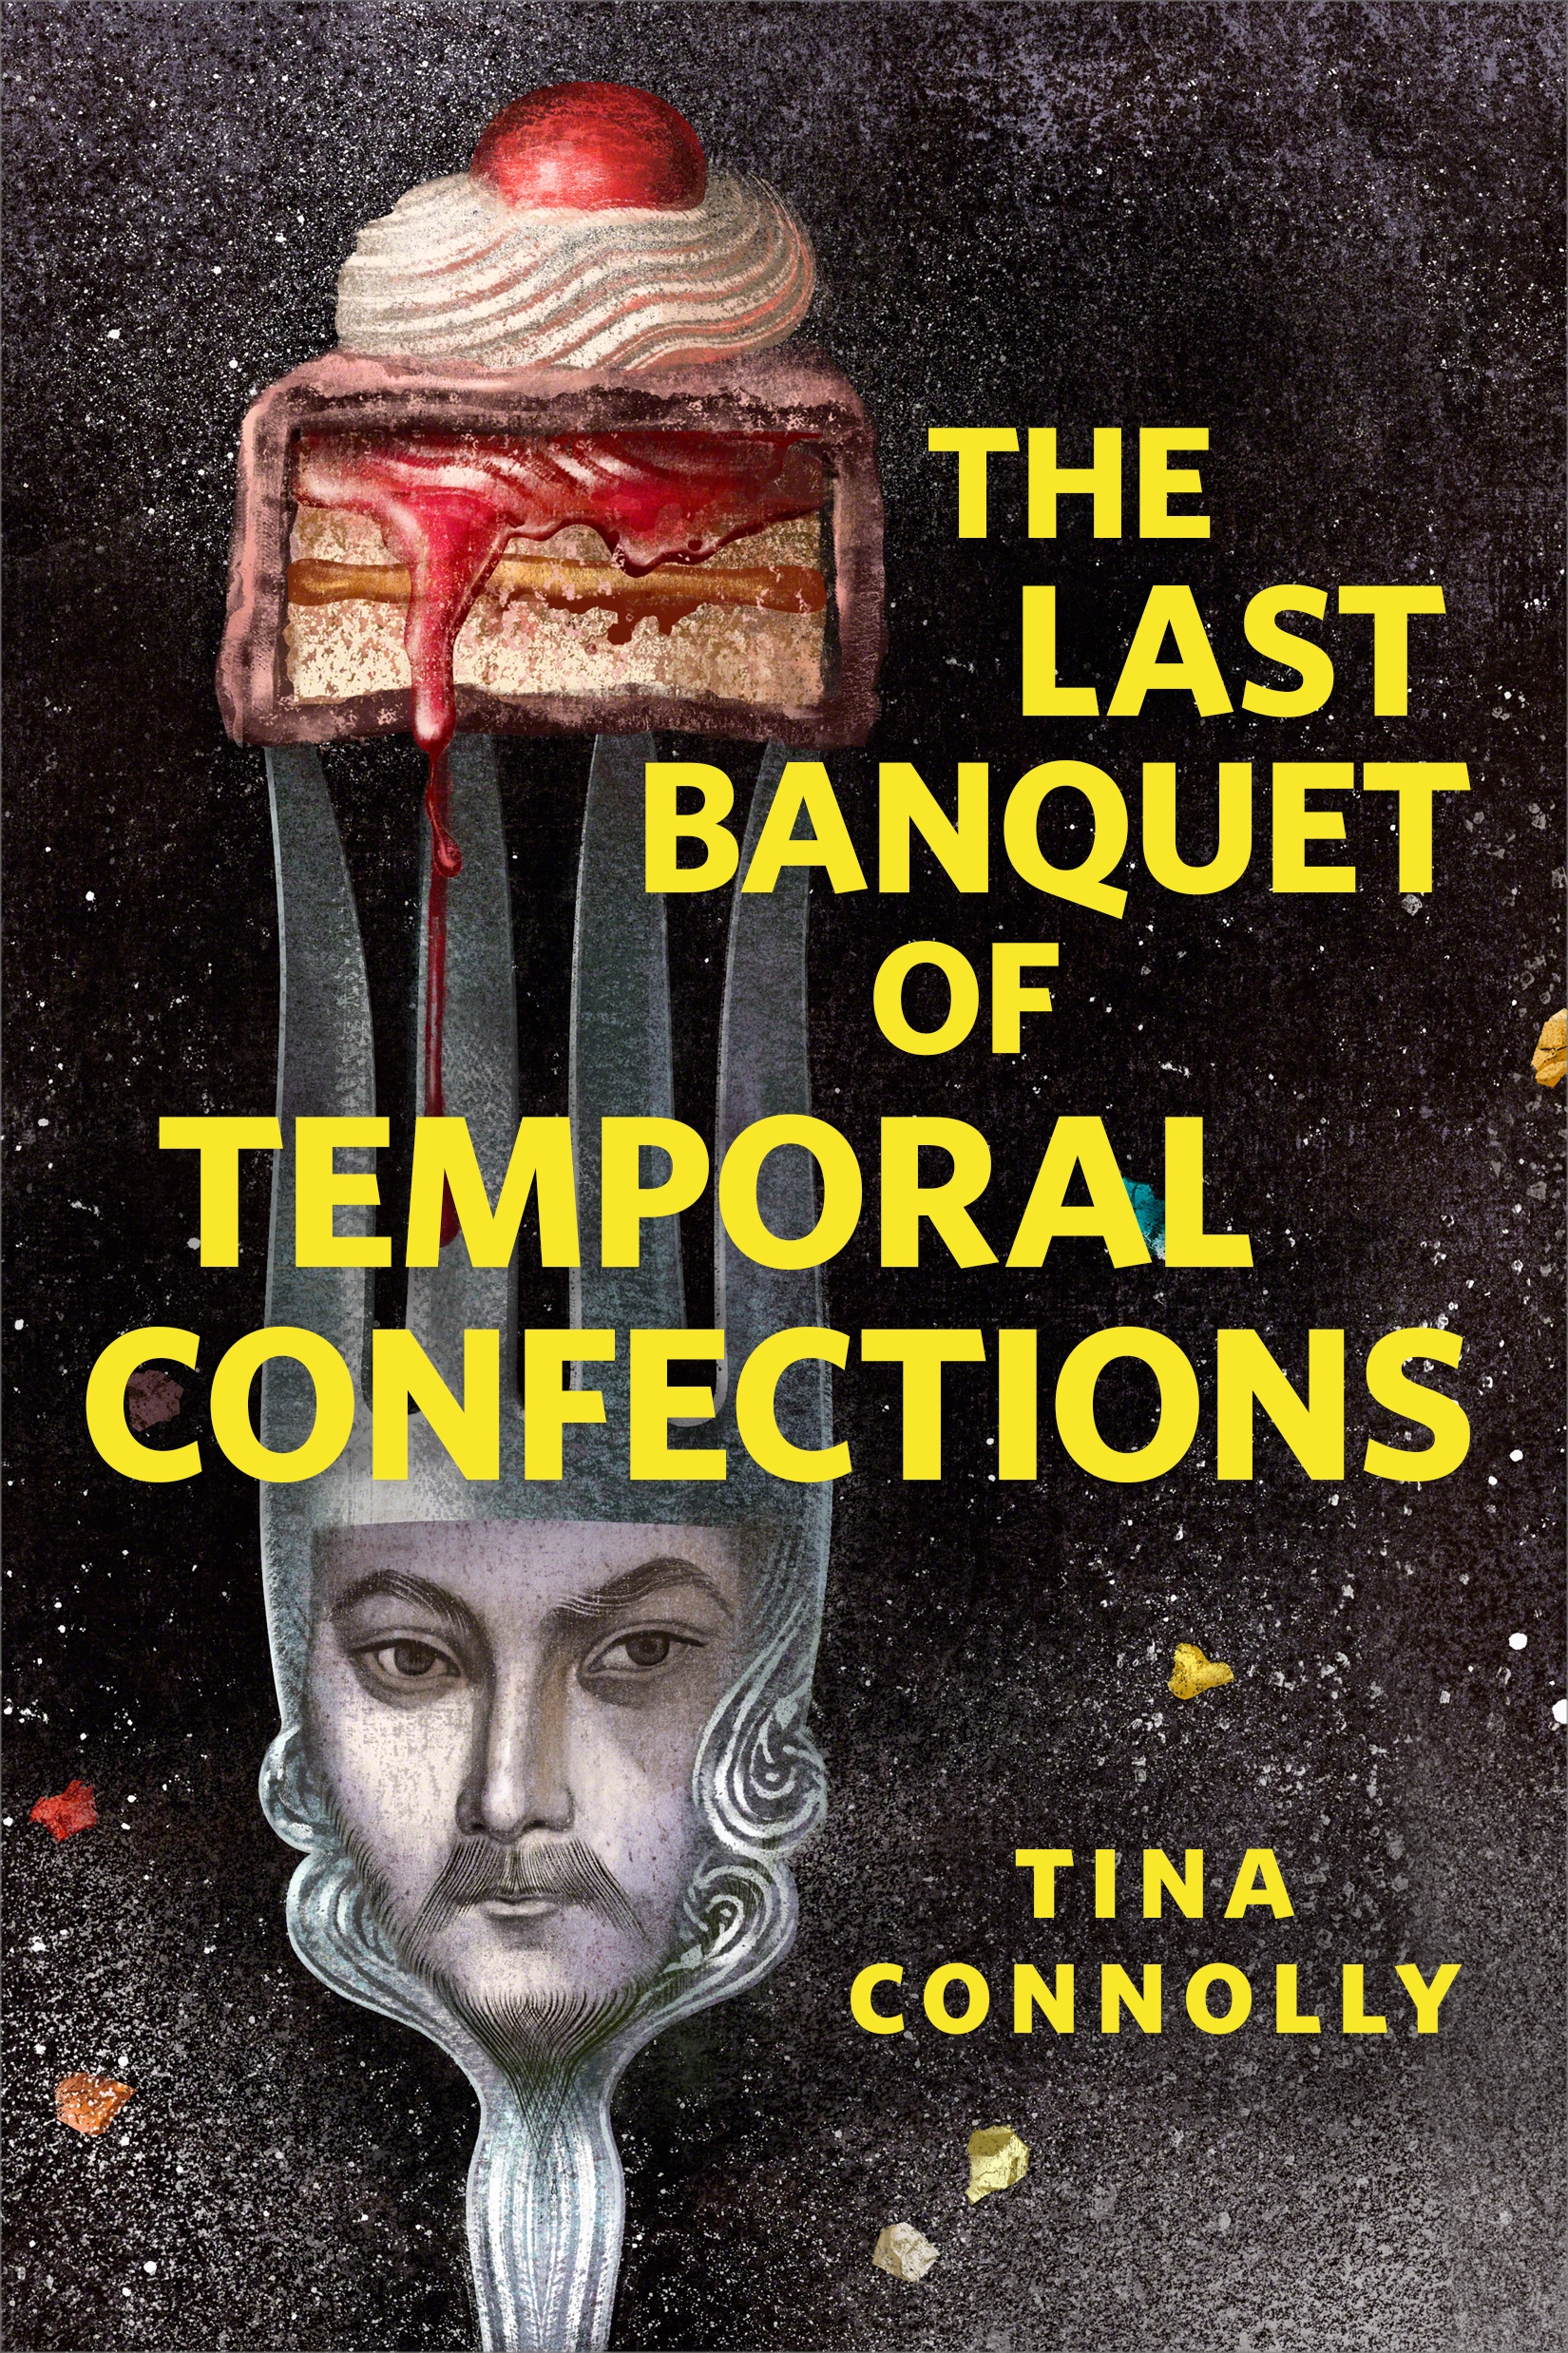 The Last Banquet of Temporal Confections : A Tor.com Original by Tina Connolly